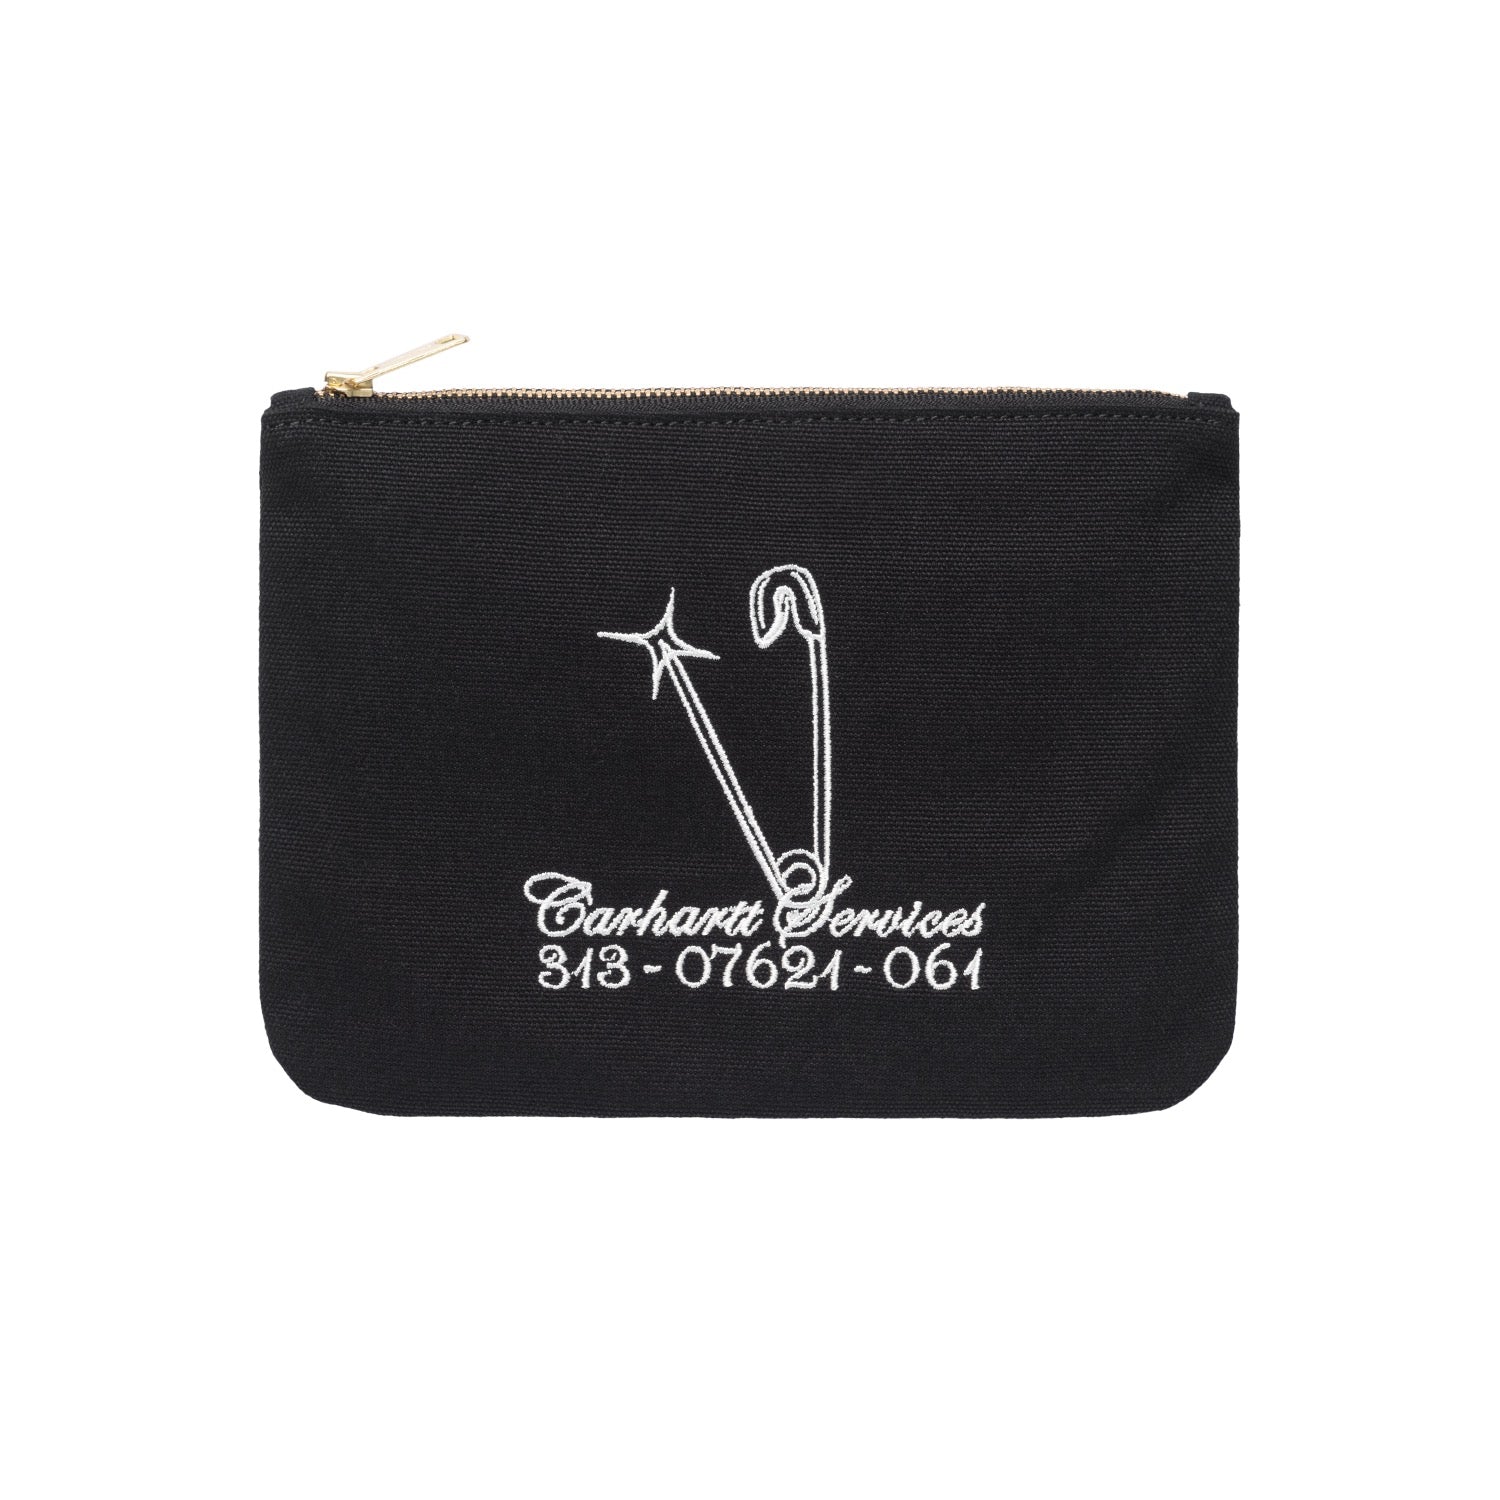 CANVAS GRAPHIC ZIP WALLET - Safety Pin Embroidery, Black / White